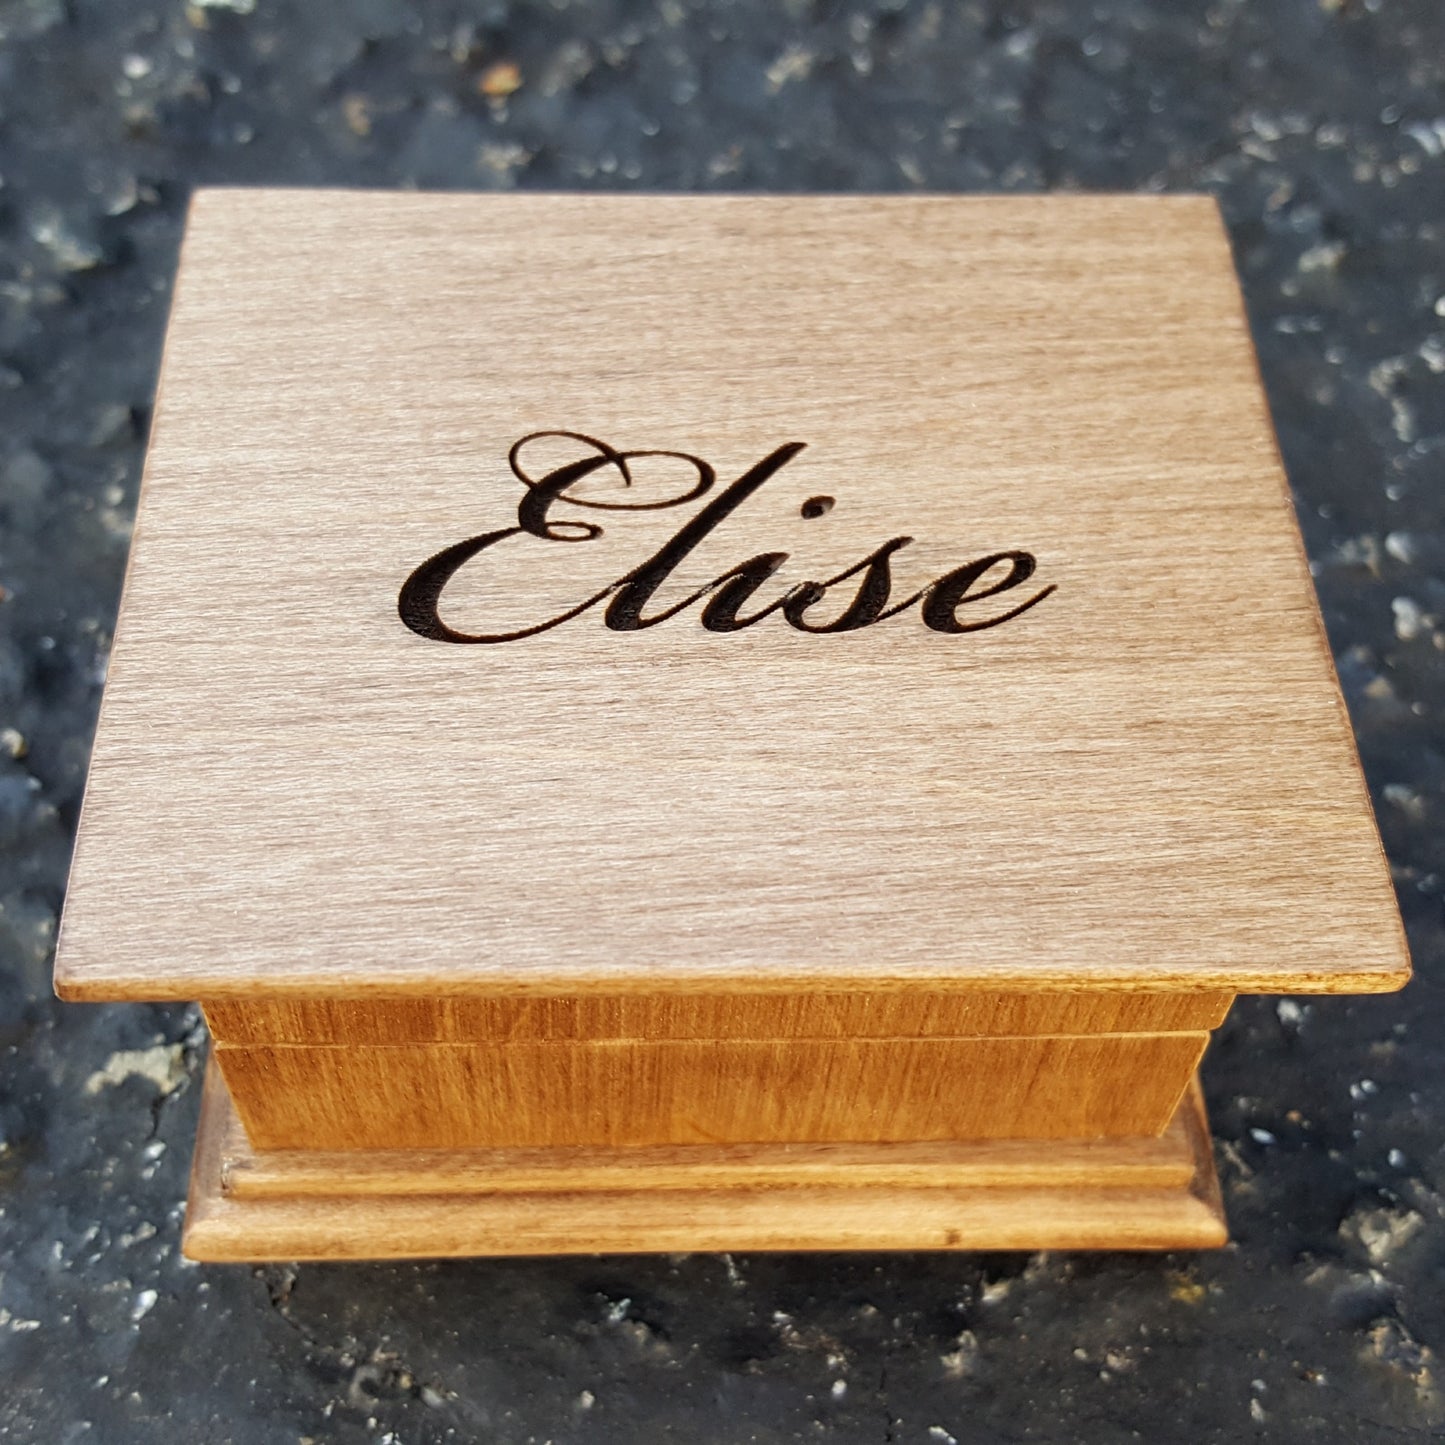 name gift, name engraved box, music box with name engraved on top with cursive font 